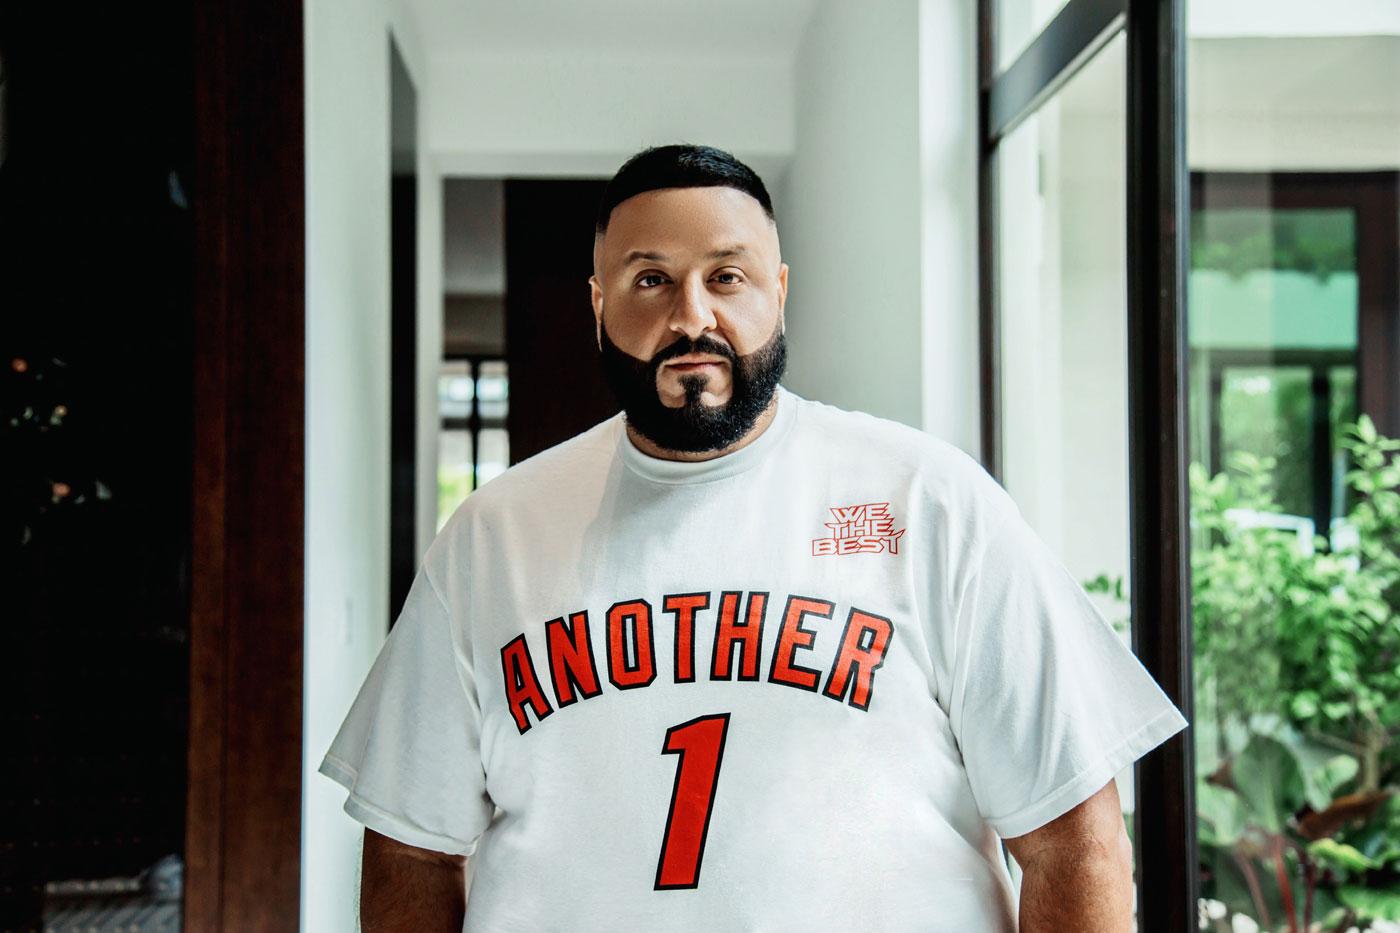 NBA Jersey Remix with Hip-Hop Legends from the Midwest to the South -  Mitchell And Ness